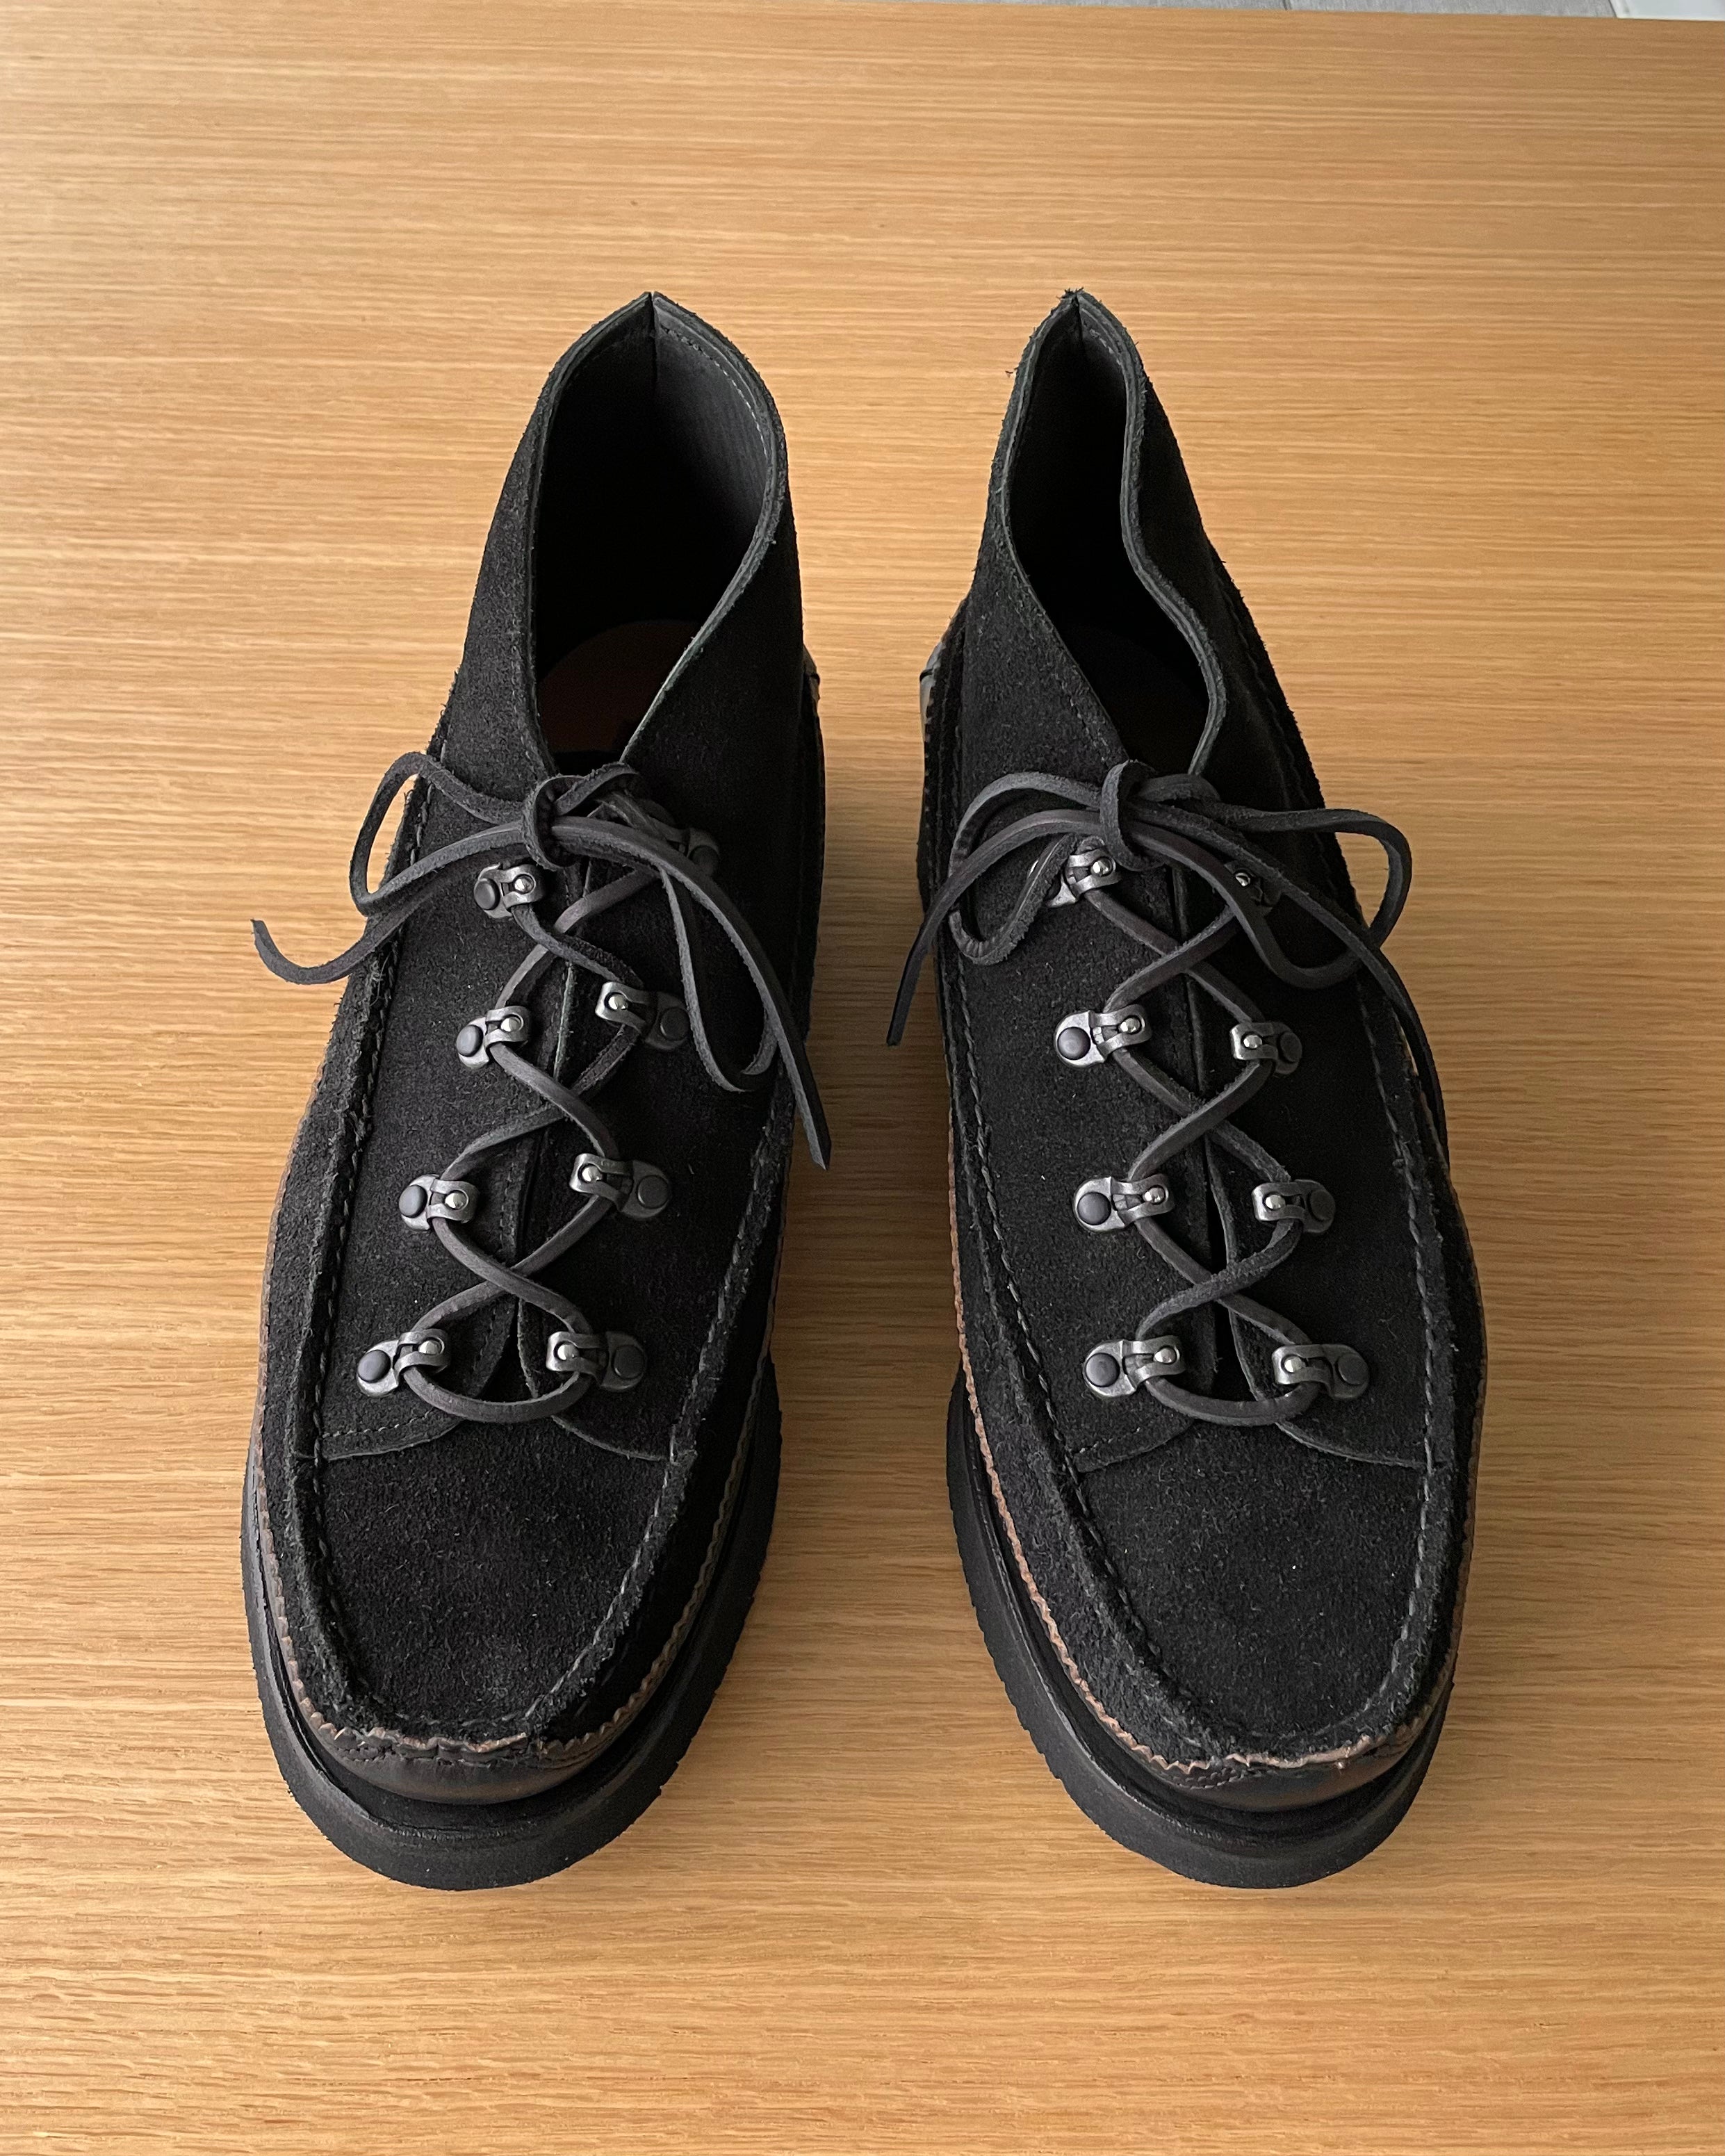 All Handsewn Tokyo DB Chukka with 2021 in FO Black x G Black – Tempo